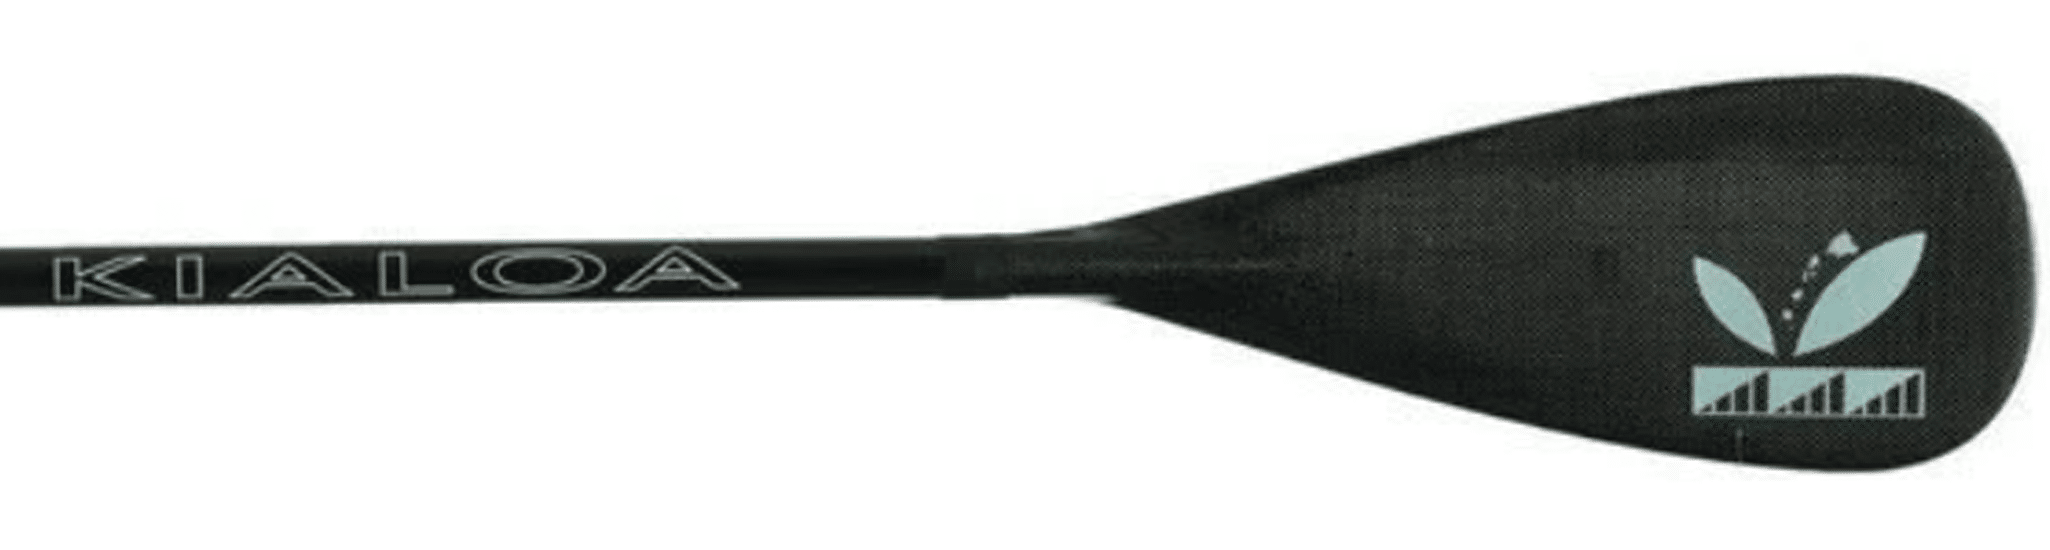 Pipes II SUP Paddle